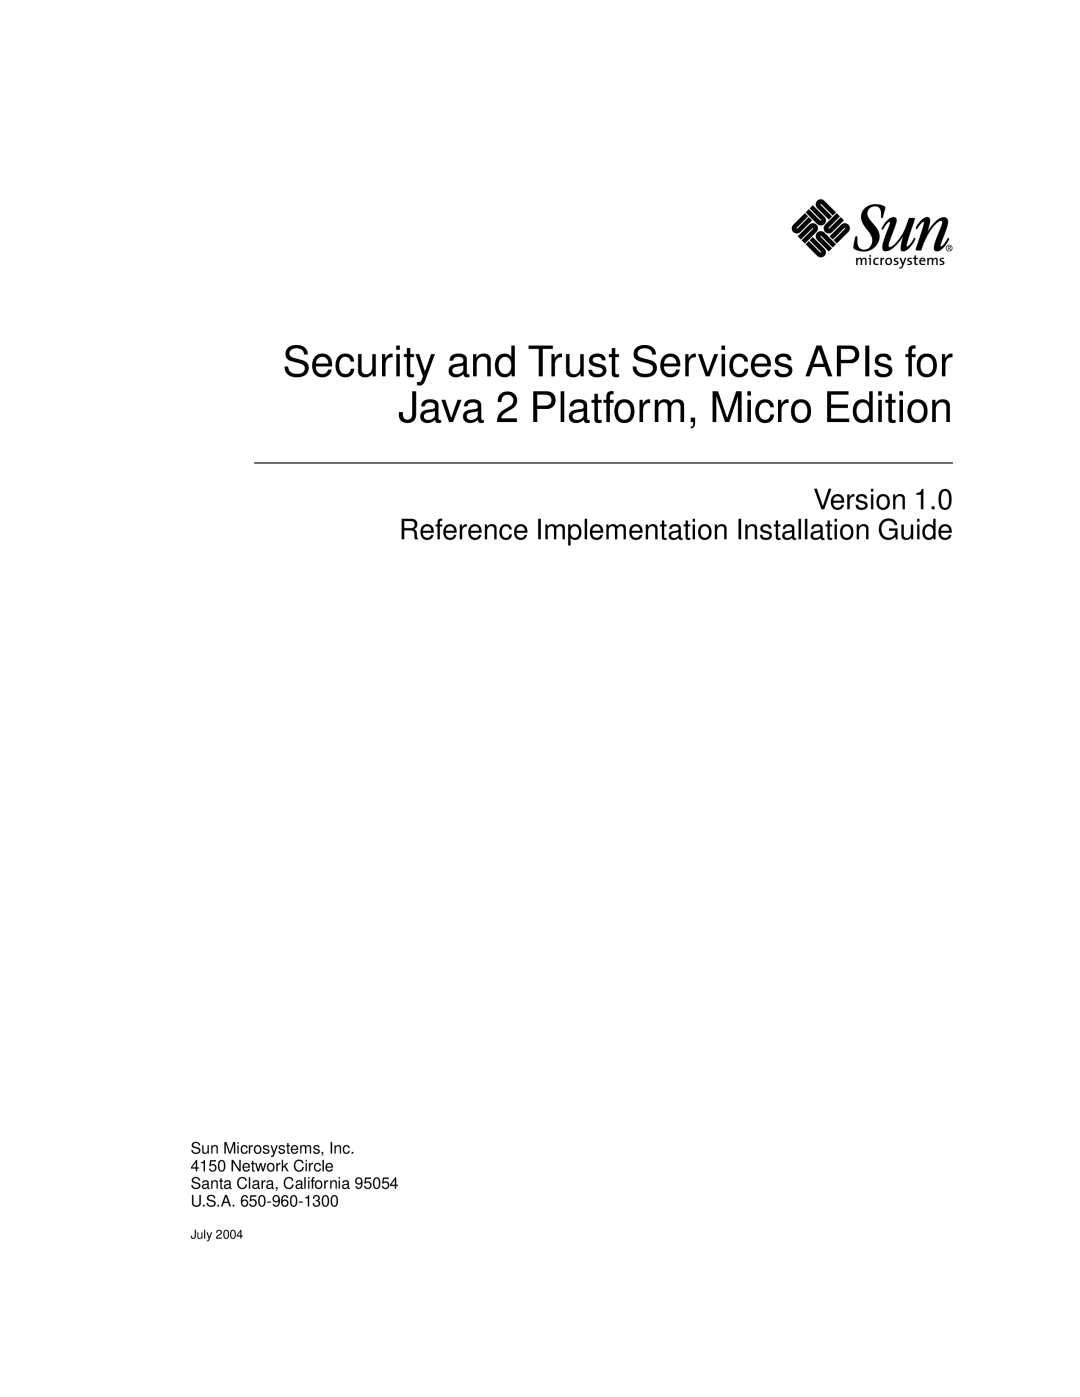 Sun Microsystems 1 manual Security and Trust Services APIs for Java 2 Platform, Micro Edition, U.S.A, July 